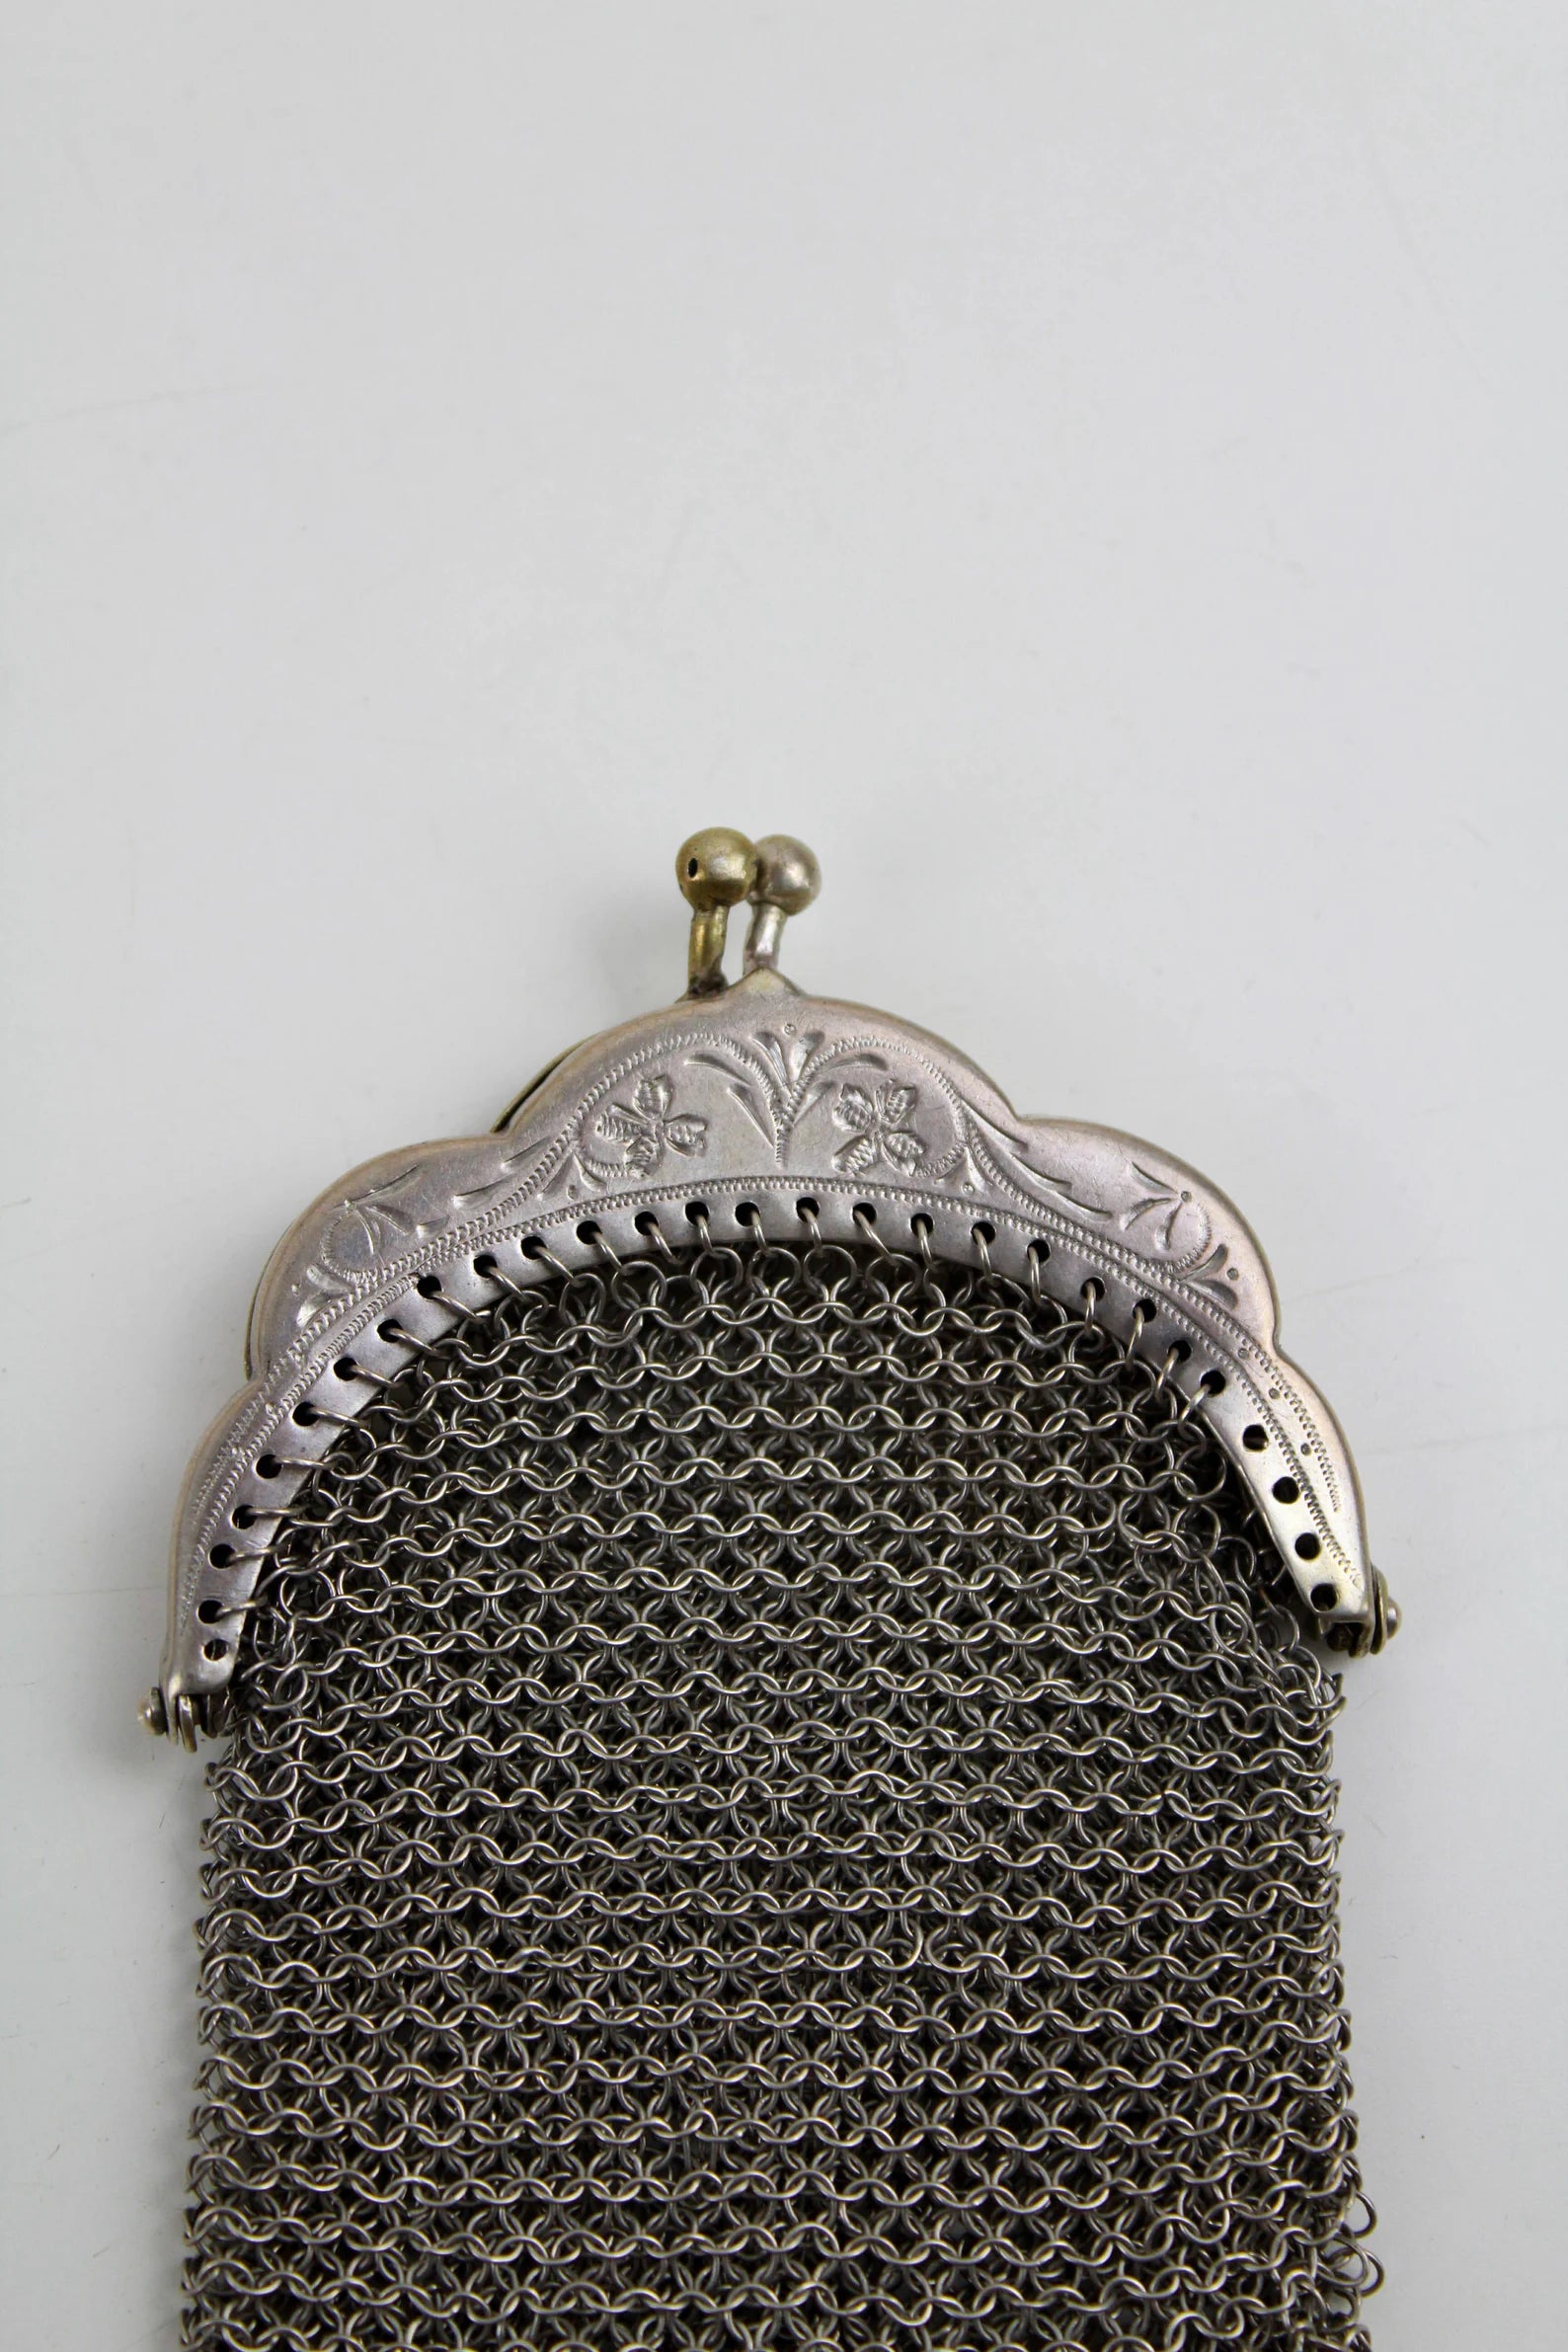 Antique Victorian Chainmail Coin Purse, Two Sections, Silver Tone Metal, Kiss Clasp, 1900s Mesh Metal Pouch